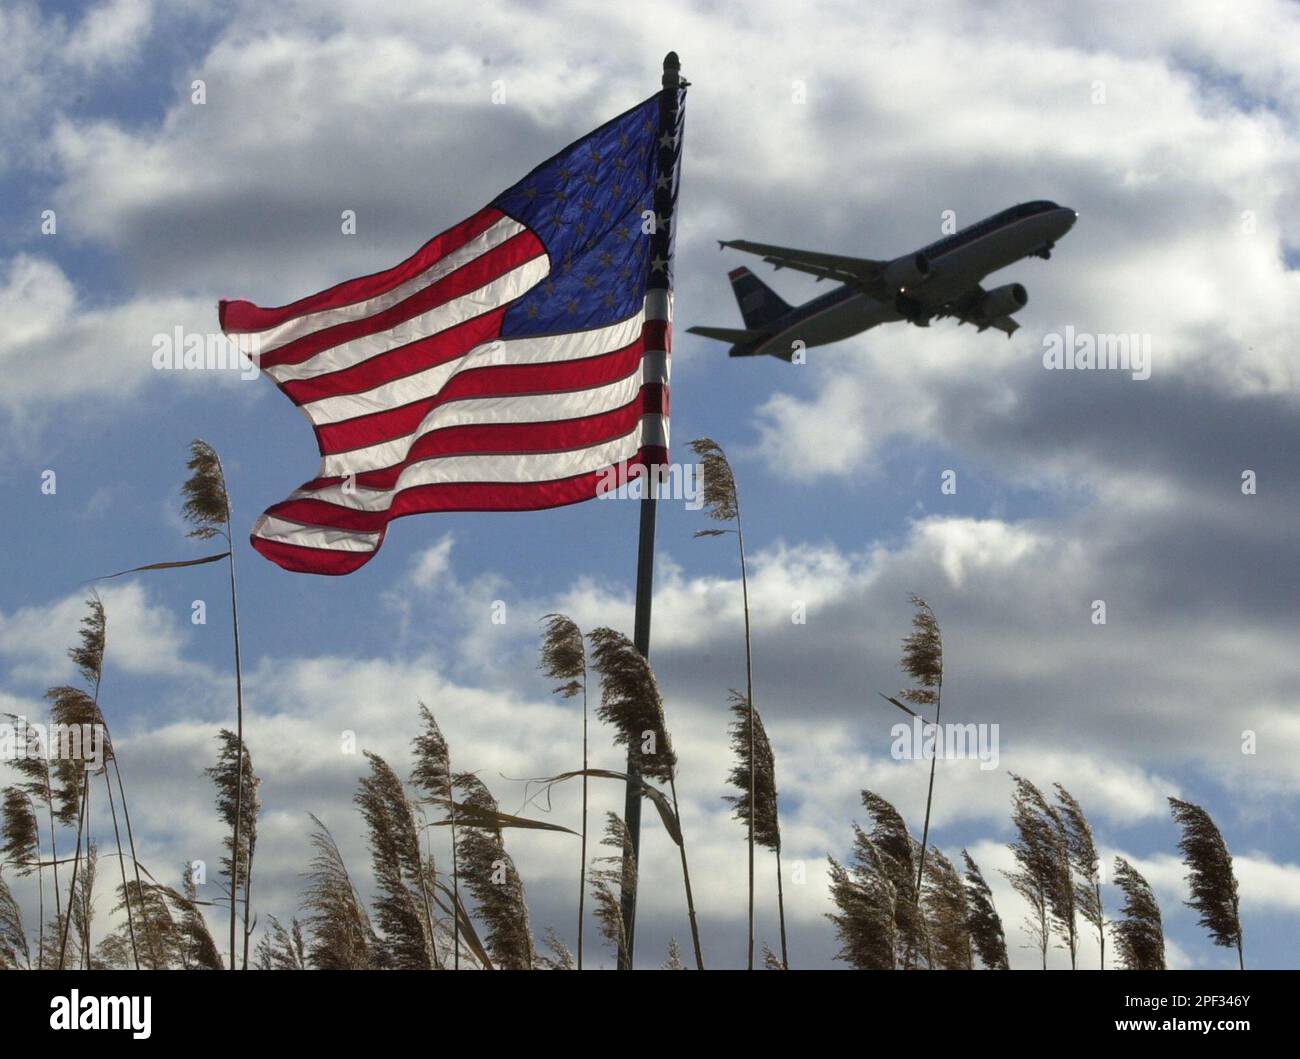 An airplane takes off from Philadelphia International Airport Tuesday, Dec.  30, 2003, in Philadelphia. Under the new Homeland Security policy issued  Monday, foreign airlines risk being denied access to American airspace if